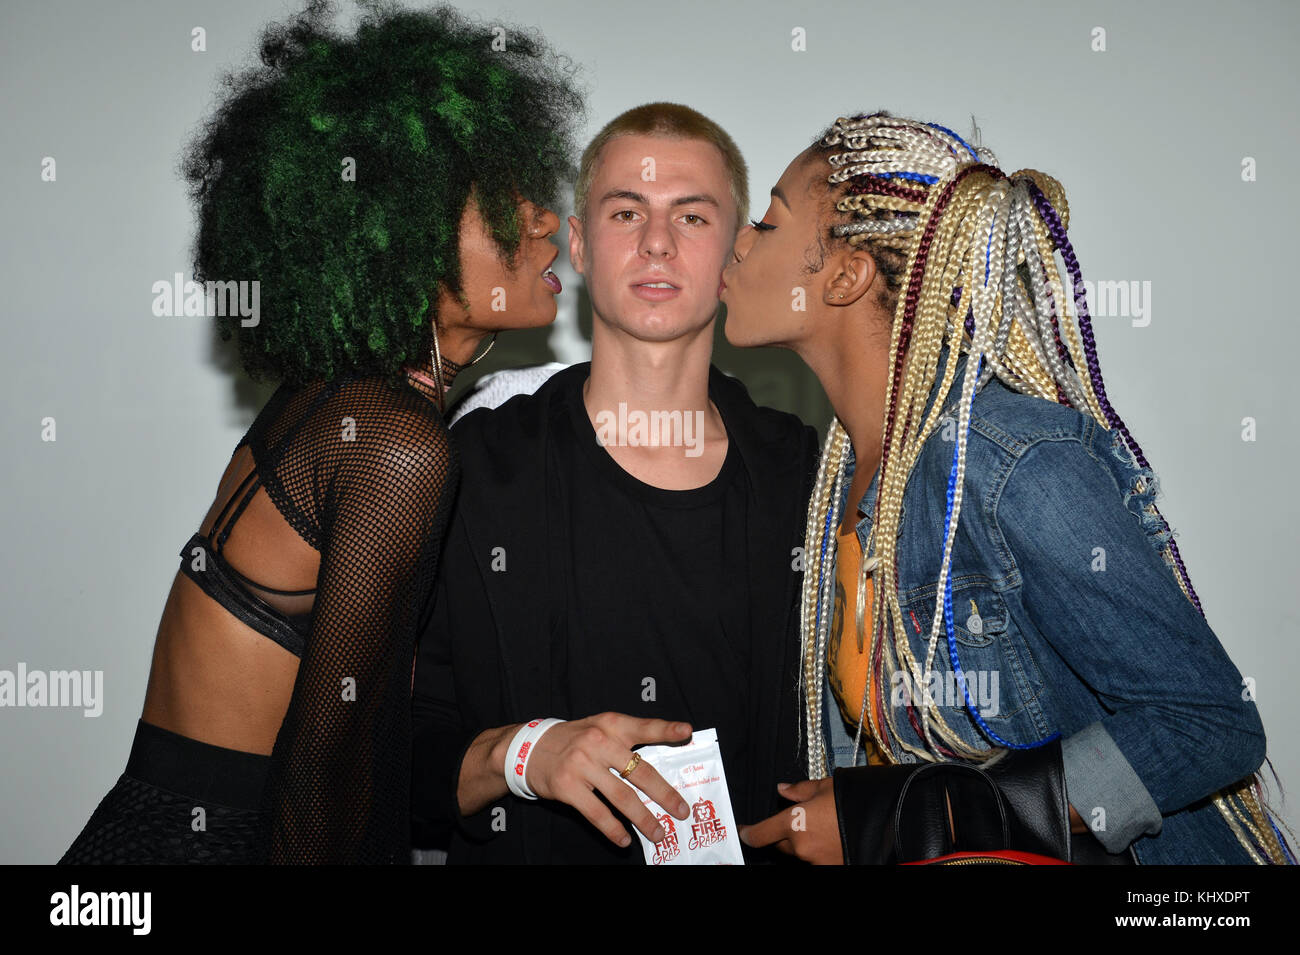 MIAMI , FL - AUGUST 08: (EXCLUSIVE COVERAGE) 20-year-old Eric Leon has emerged as a young gun on the hip hop scene and has been referred to as the next Eminem. He dropped his self-titled mixtape with DJ Khaled at an exclusive launch party tonight  hosted by Grammy Award-winning producers Cool & Dre at Universal Miami Studios on August 08, 2017 in Miami Beach, Florida  People:  Eric Leon Stock Photo